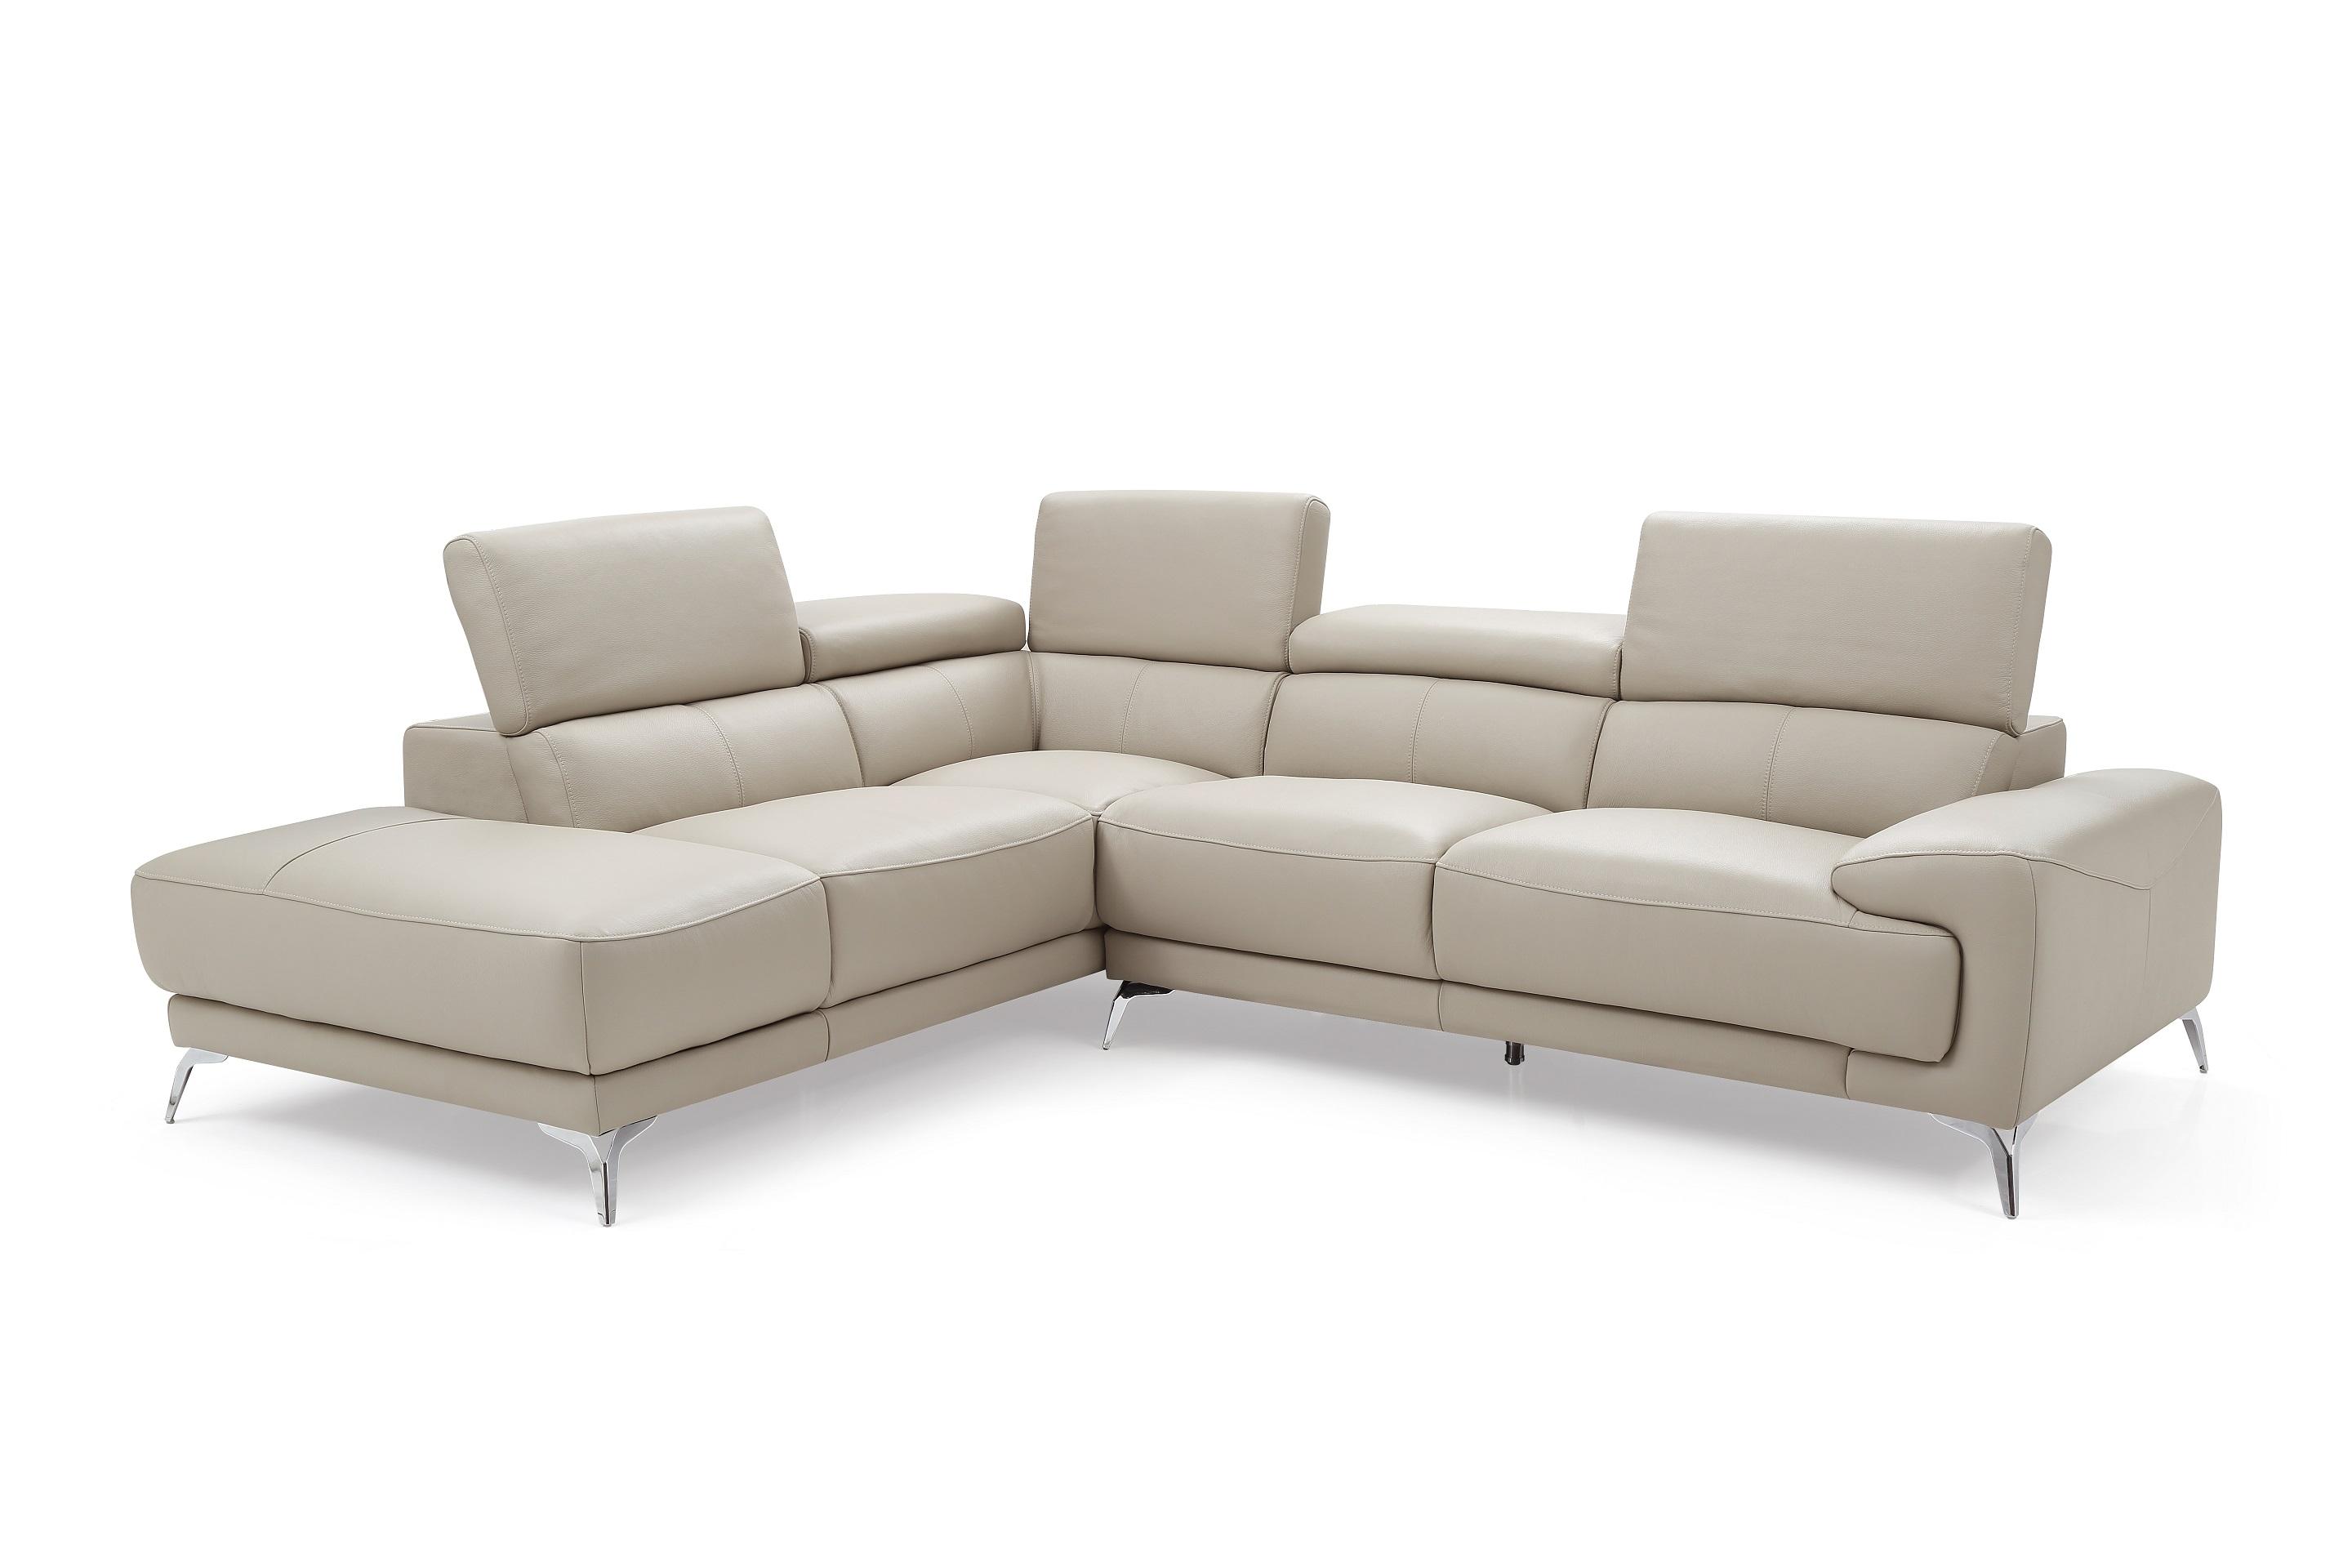 

    
Contemporary Light Gray Top Grain Leather LSF Sectional WhiteLine SL1467LS-LGRY Fabiola
